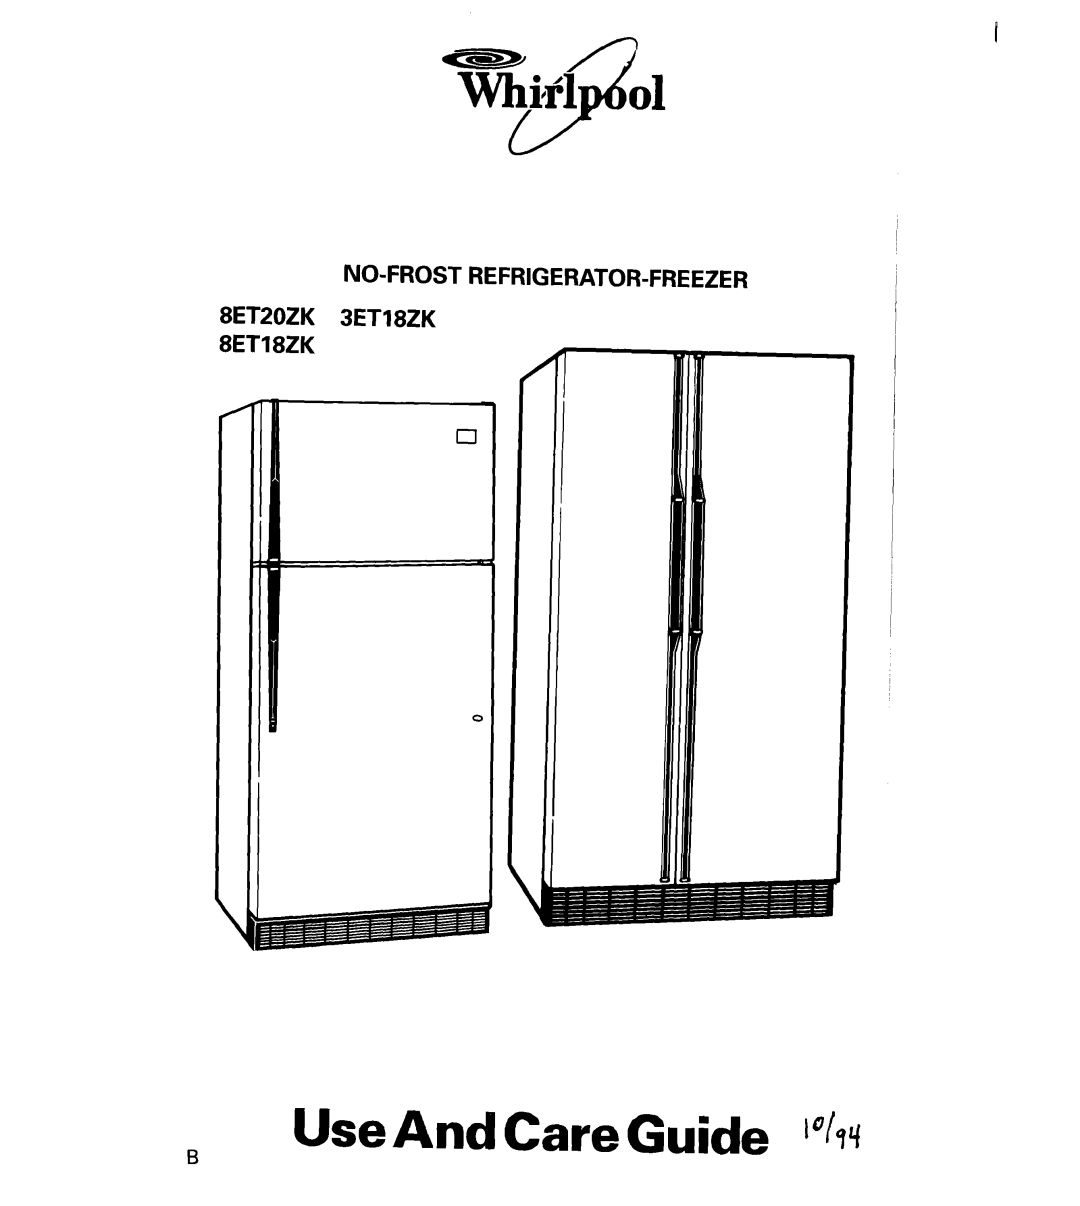 Whirlpool manual Use And Care Guide %I, No-Frost Refrigerator-Freezer, 8ET20ZK 3ET18ZK 8ET18ZK 